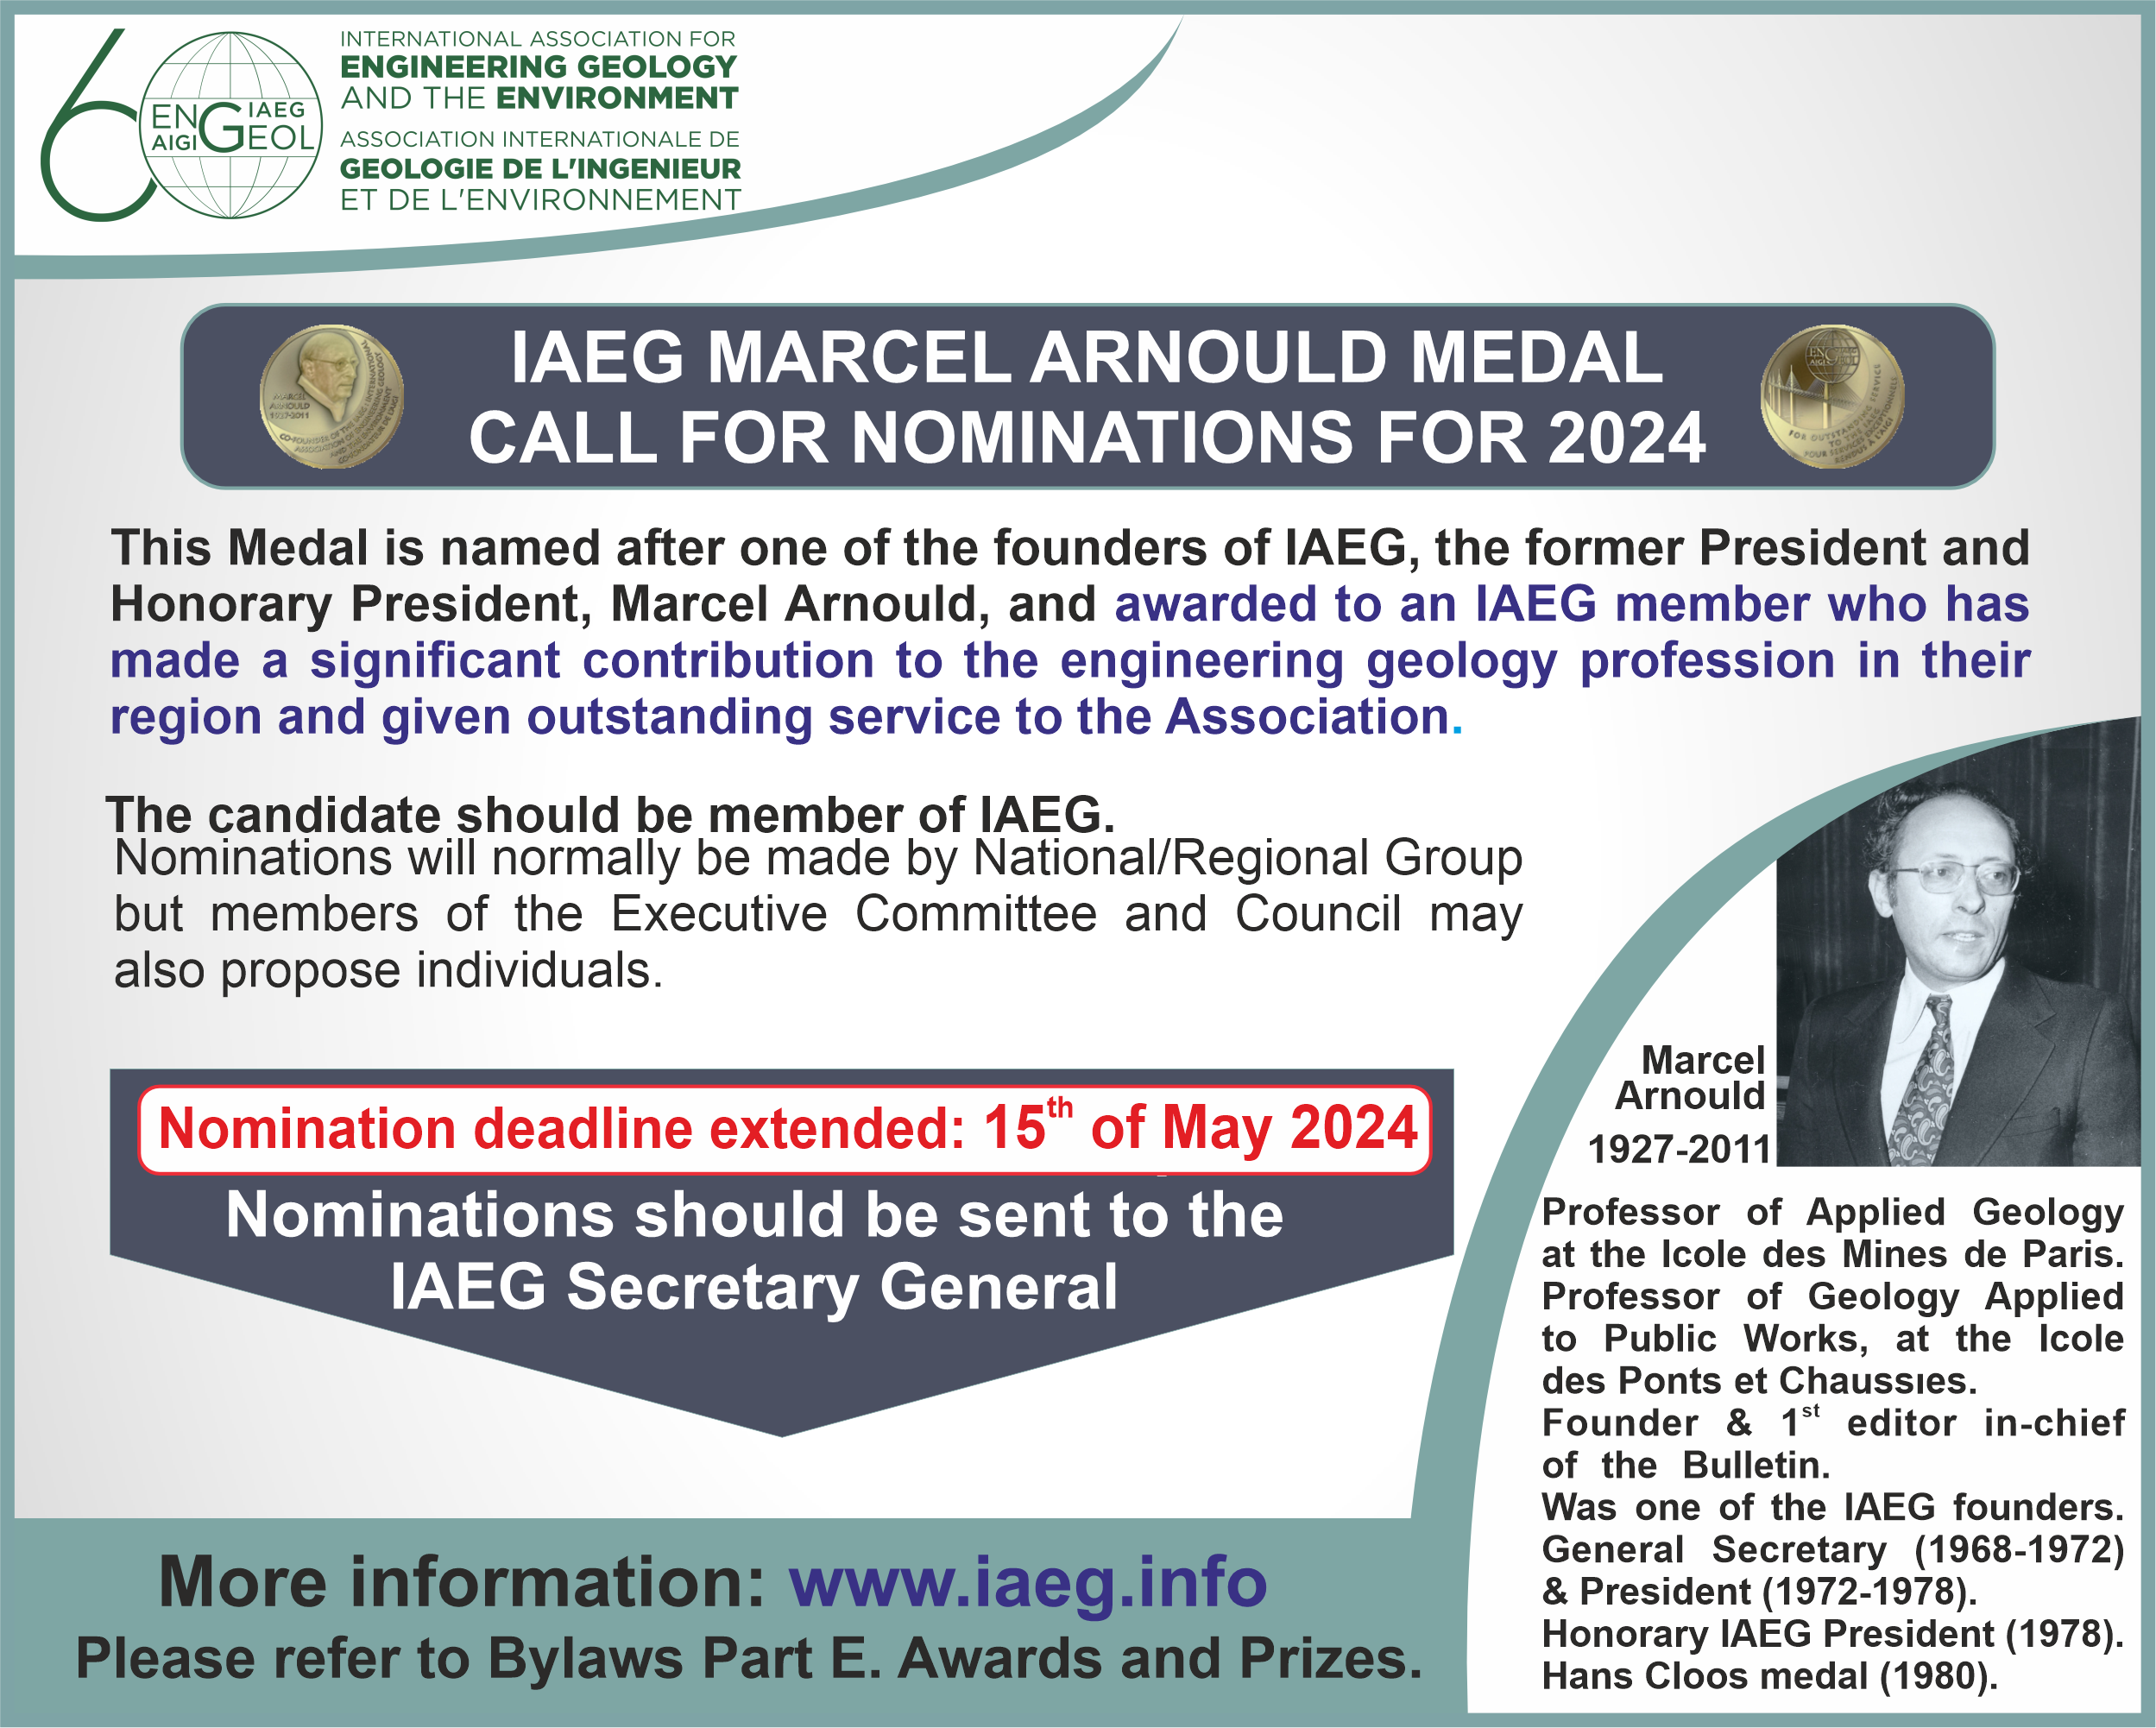 CALL FOR NOMINATIONS OF IAEG MARCEL ARNOULD MEDAL 2024